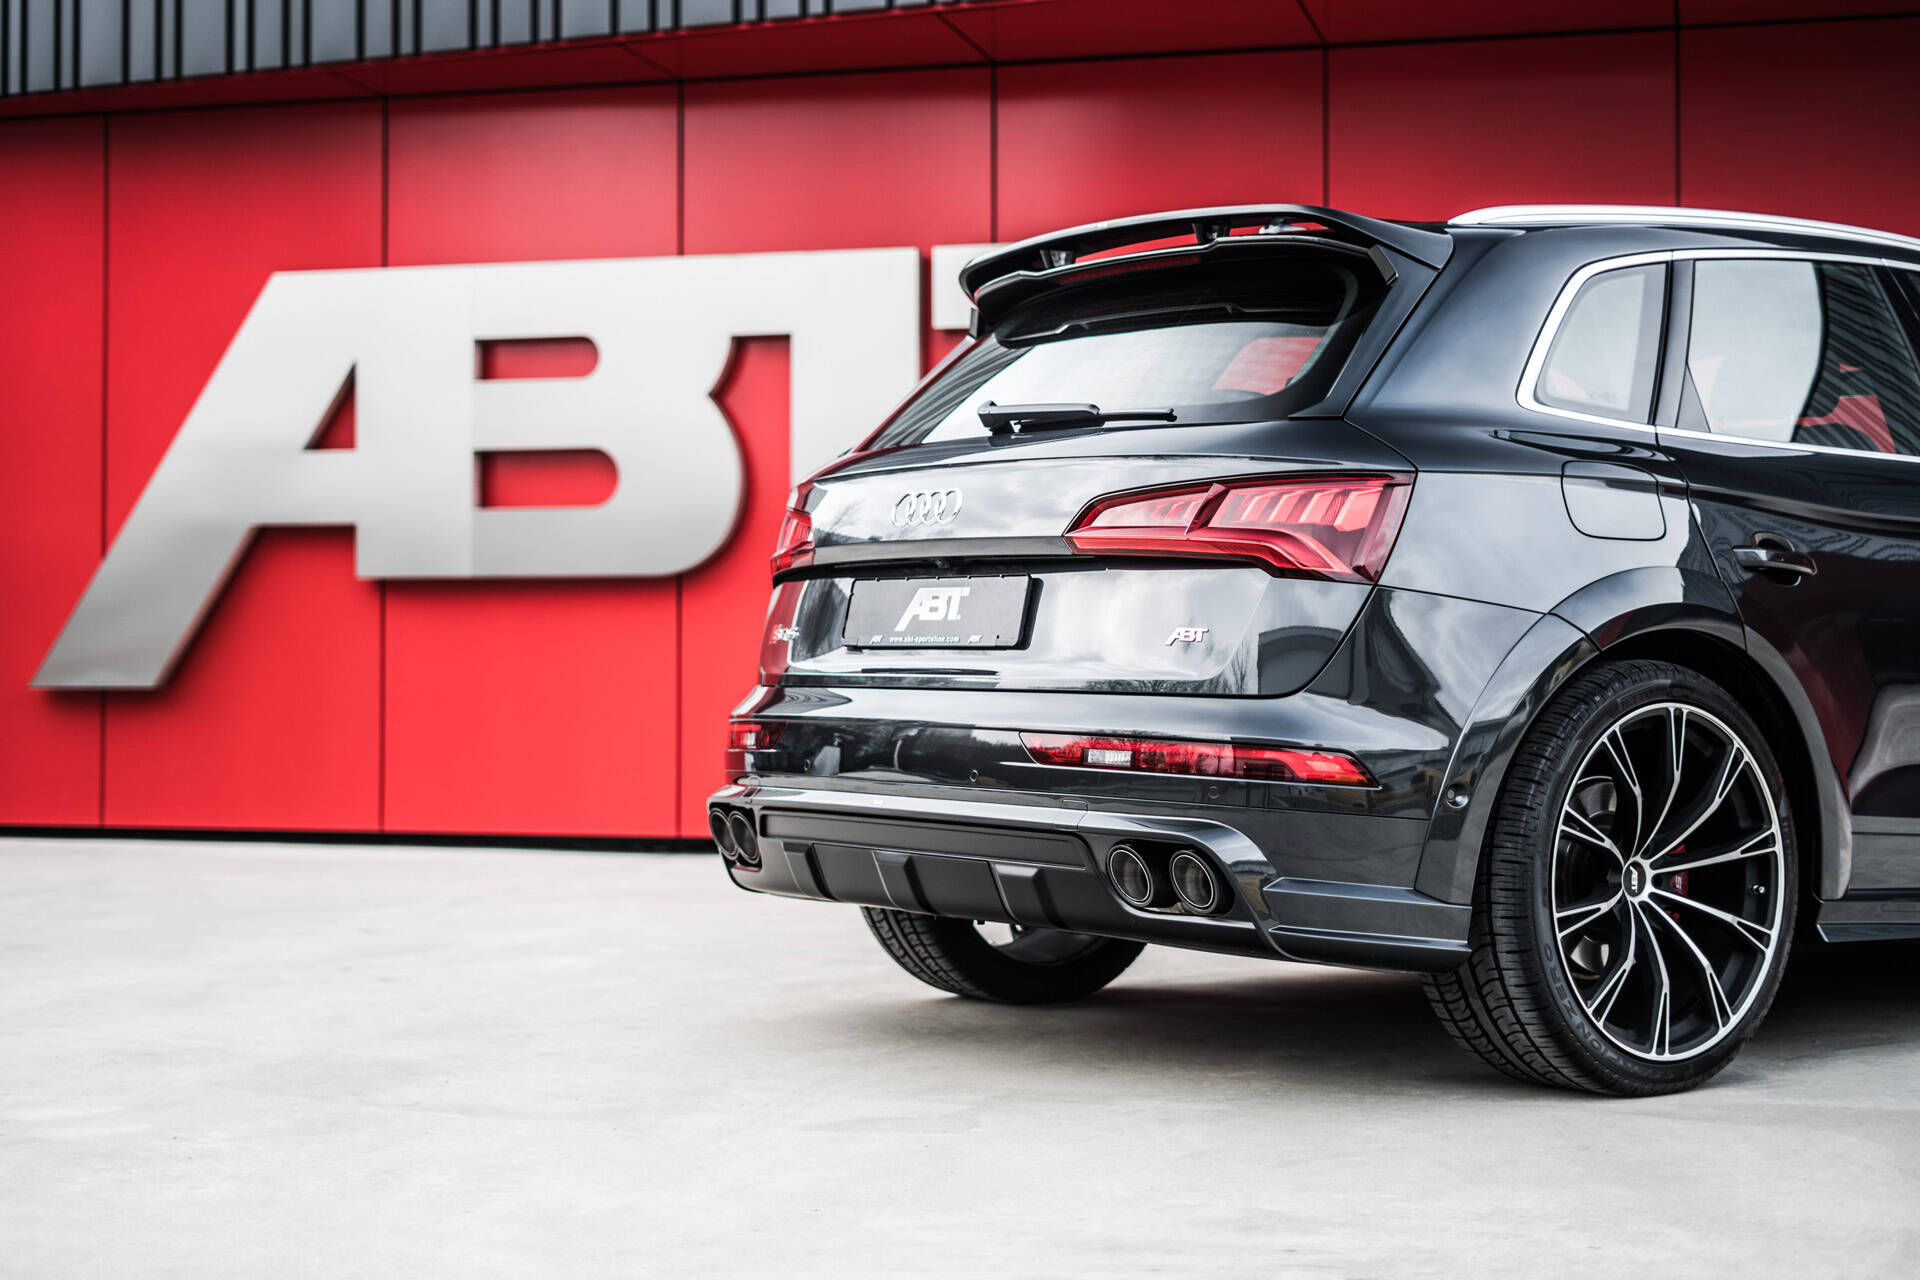 ABT body kit for 2018 Audi SQ5 and Q5 - Audi Tuning, VW Tuning